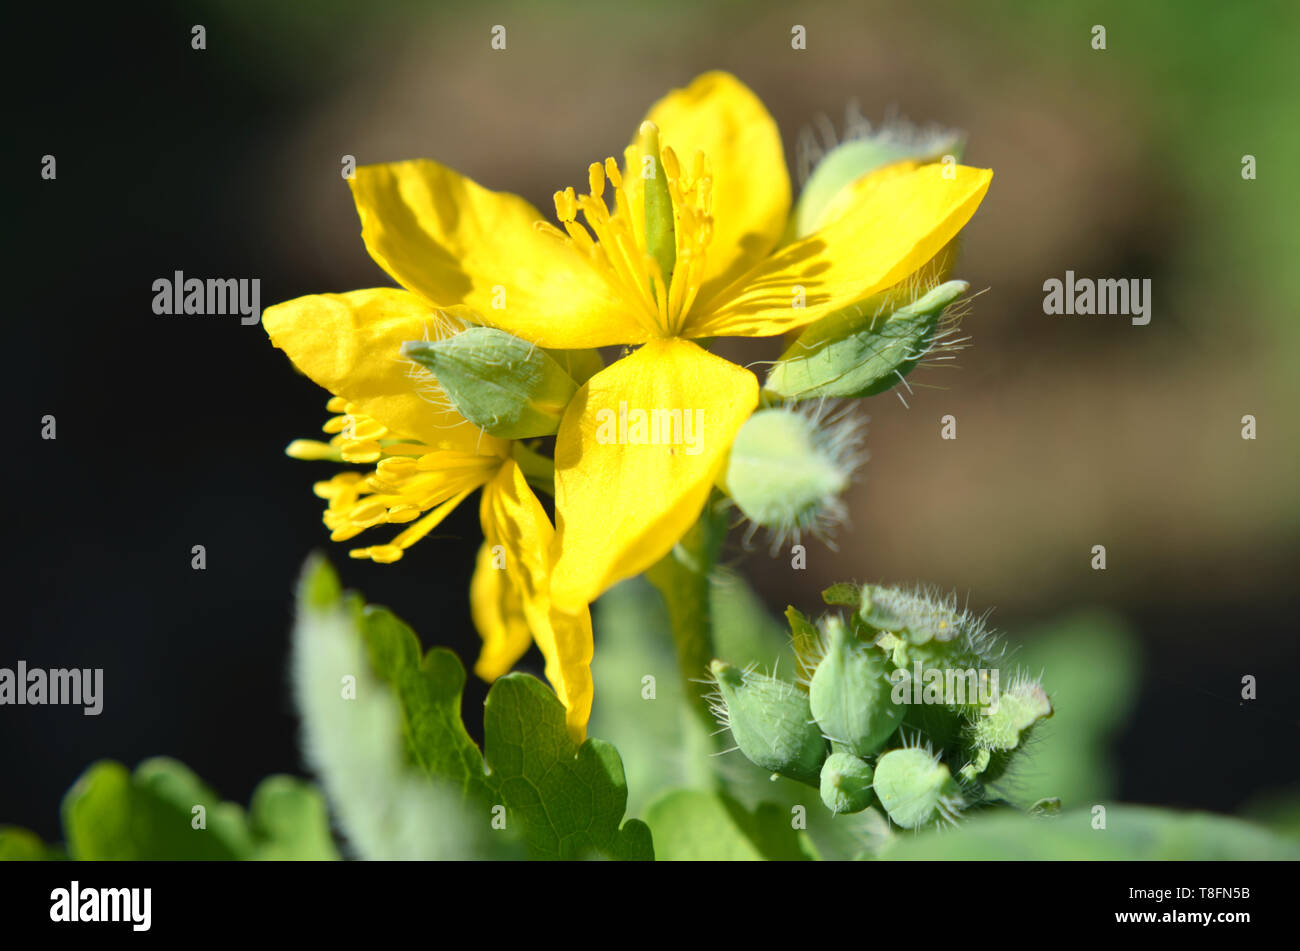 Chelidonium majus, commonly known as greater celandine, nipplewort, swallowwo] or tetterwort - an invasive plant used in herbal medicine Stock Photo